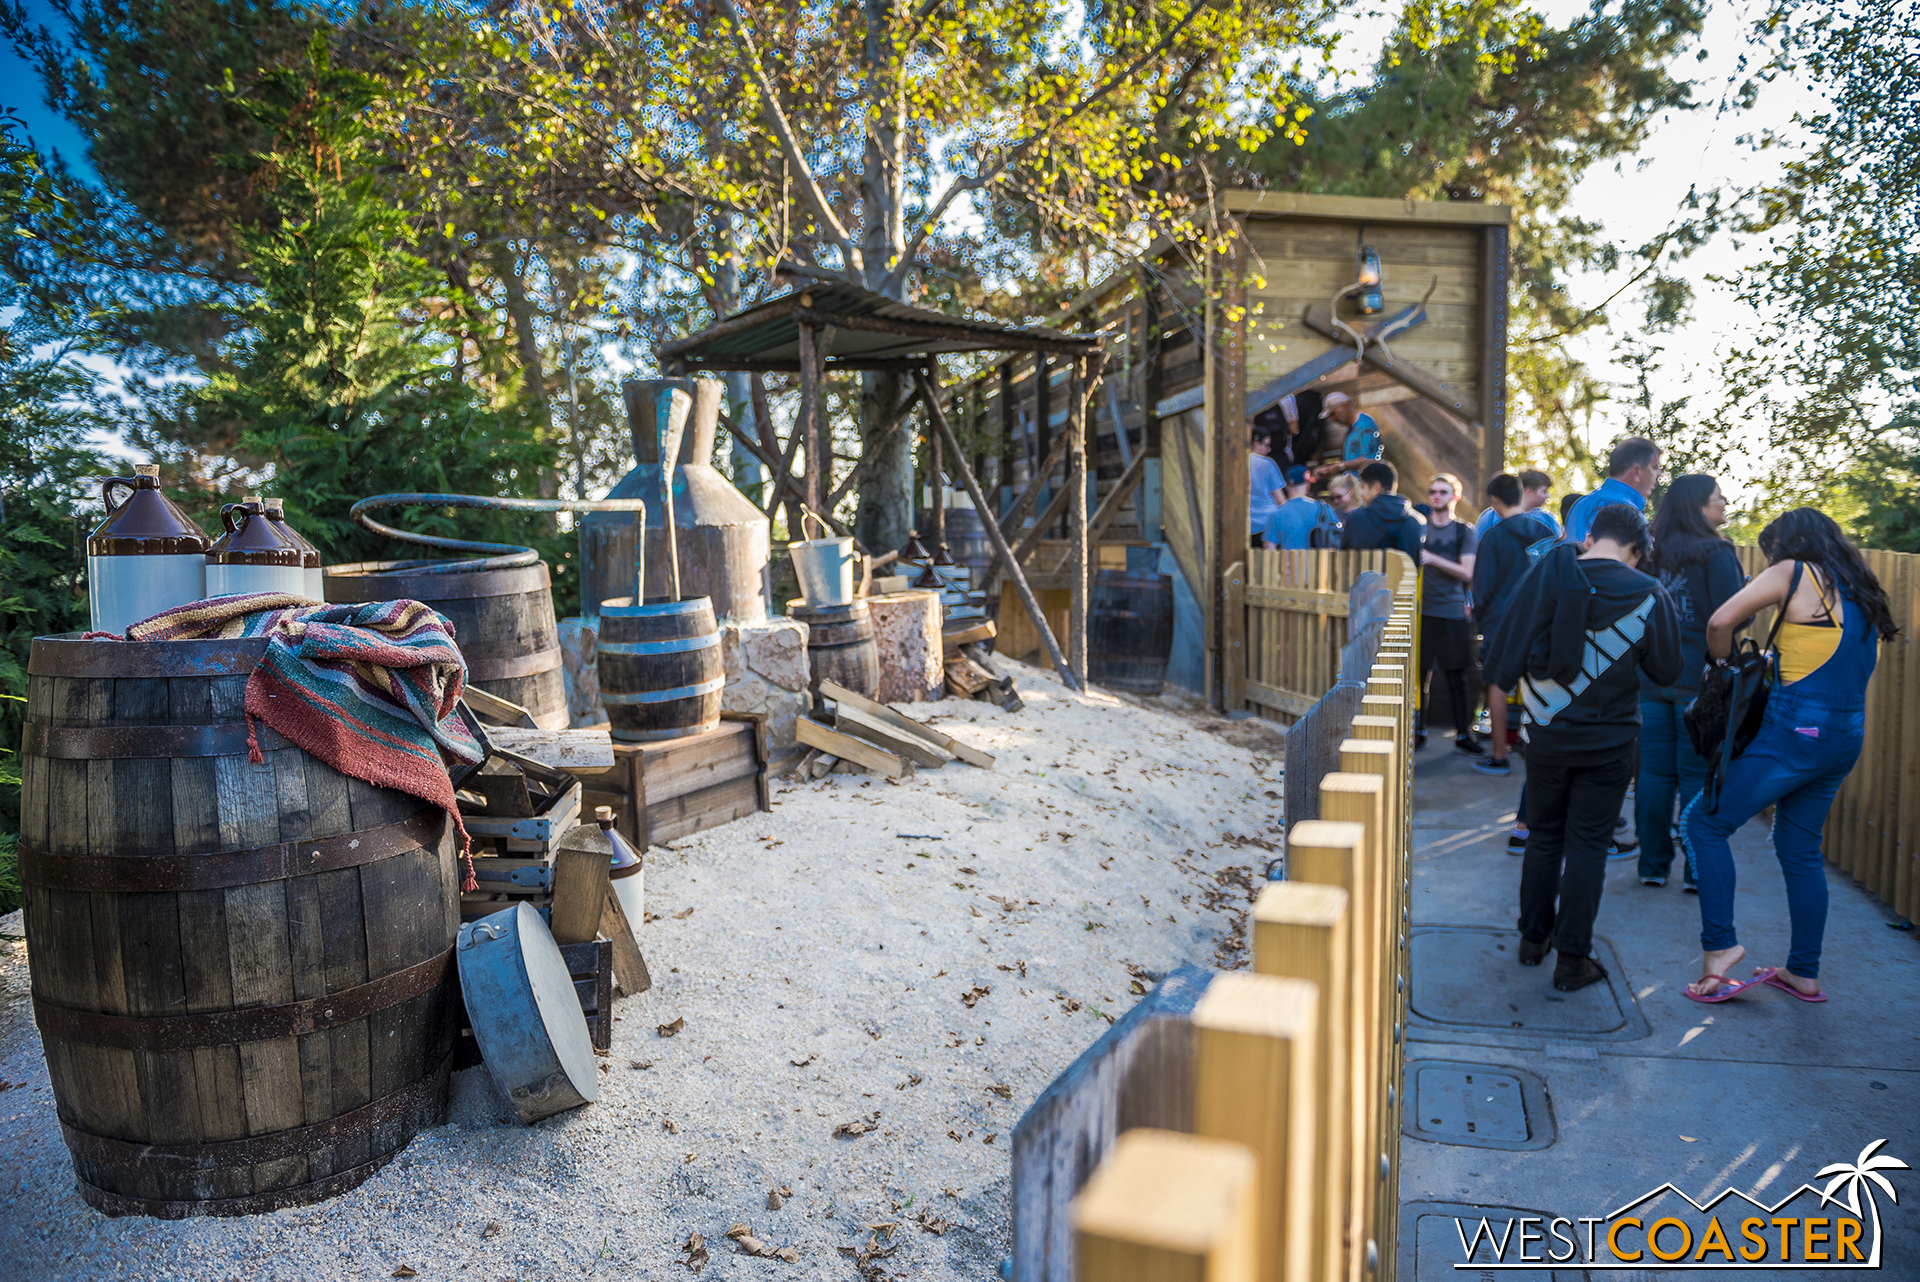  The park has added a redone bridge and some encampment theming as well. 